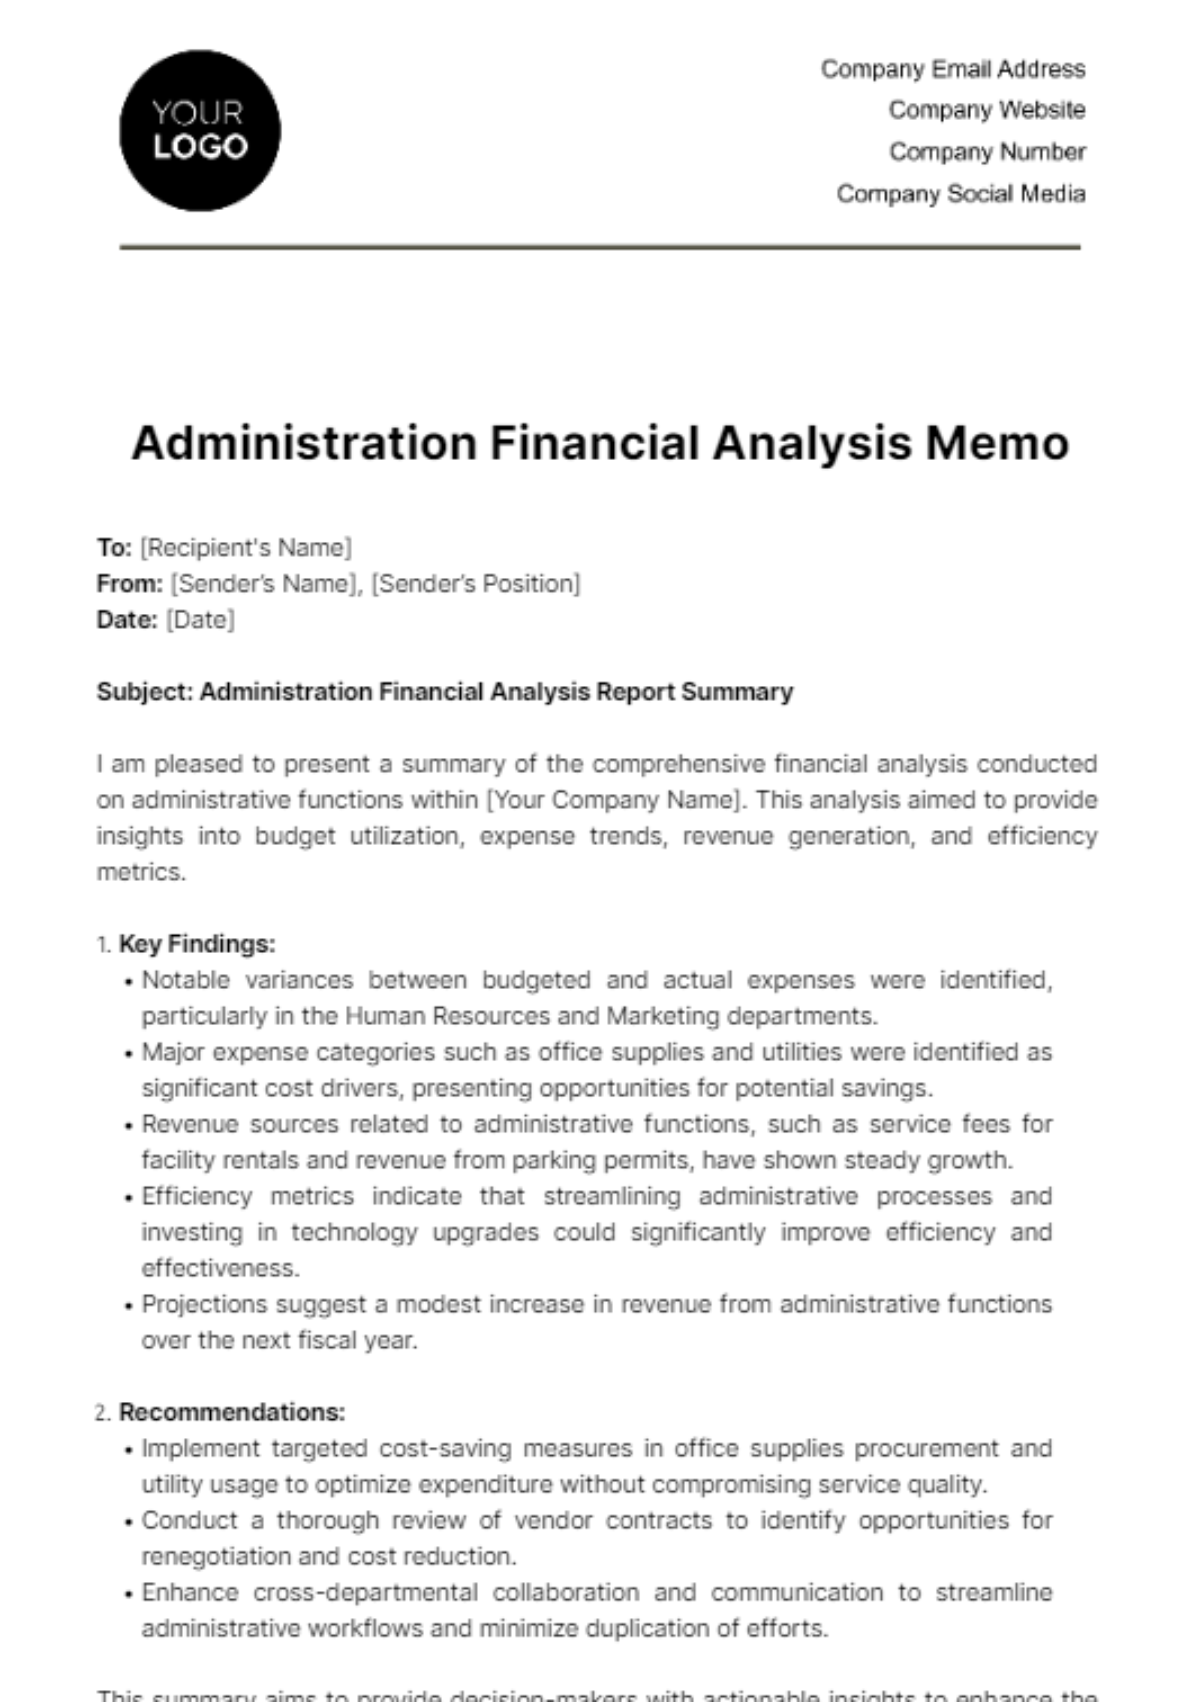 Free Administration Financial Analysis Memo Template